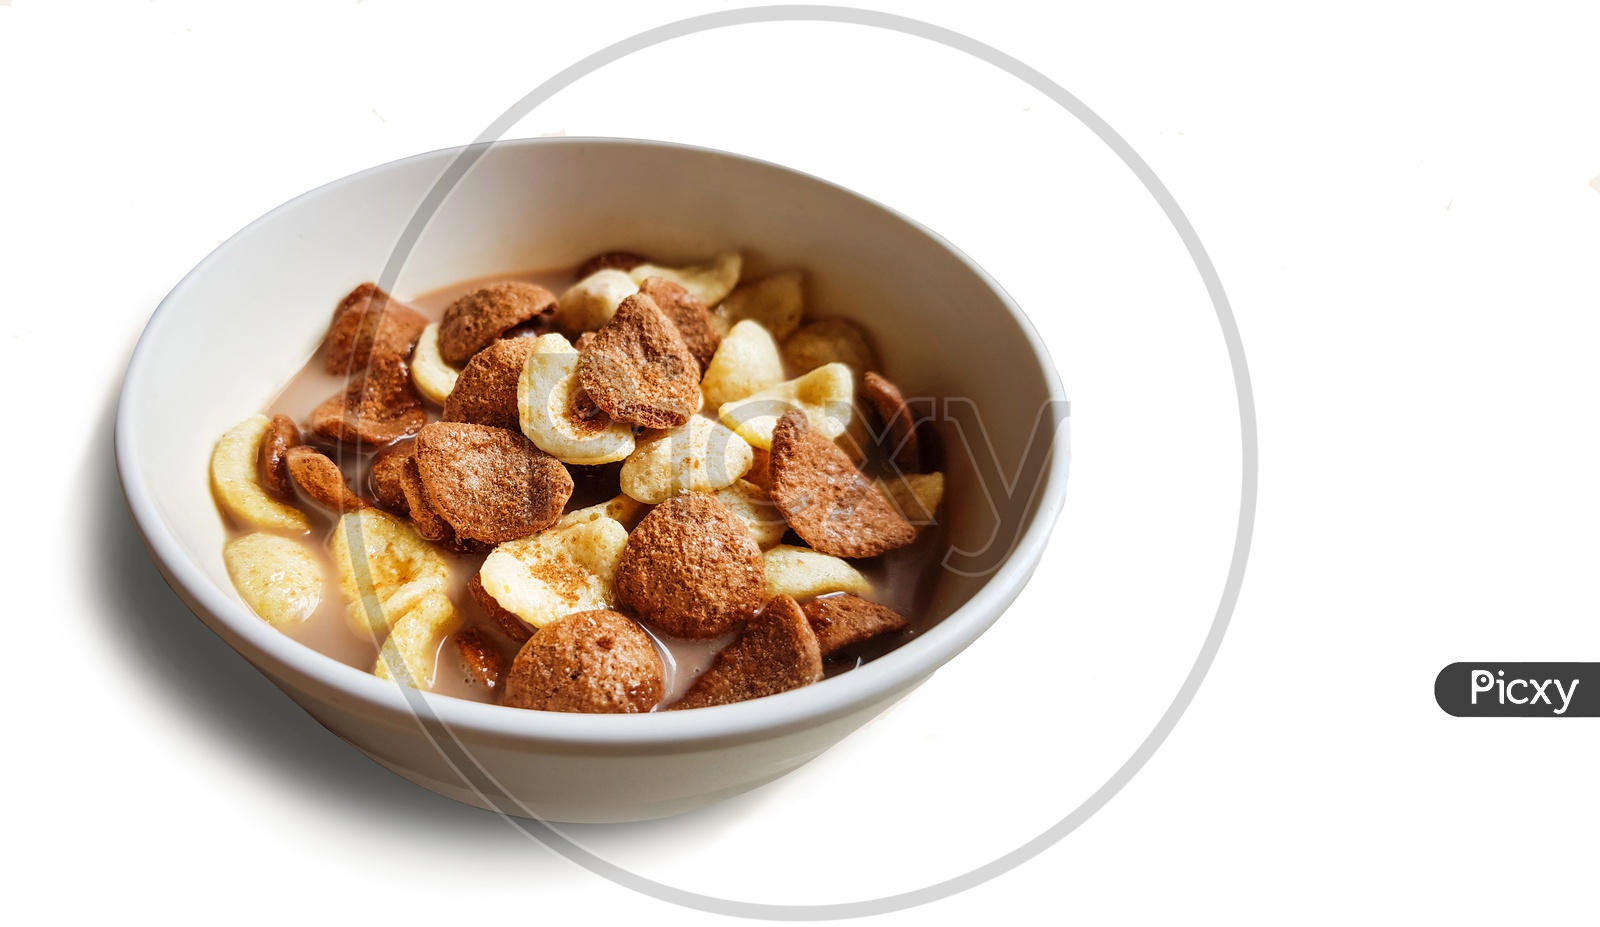 Vanilla And Chocolate Cornflakes Dipped In Chocolate Milk In A White Bowl In Light Background